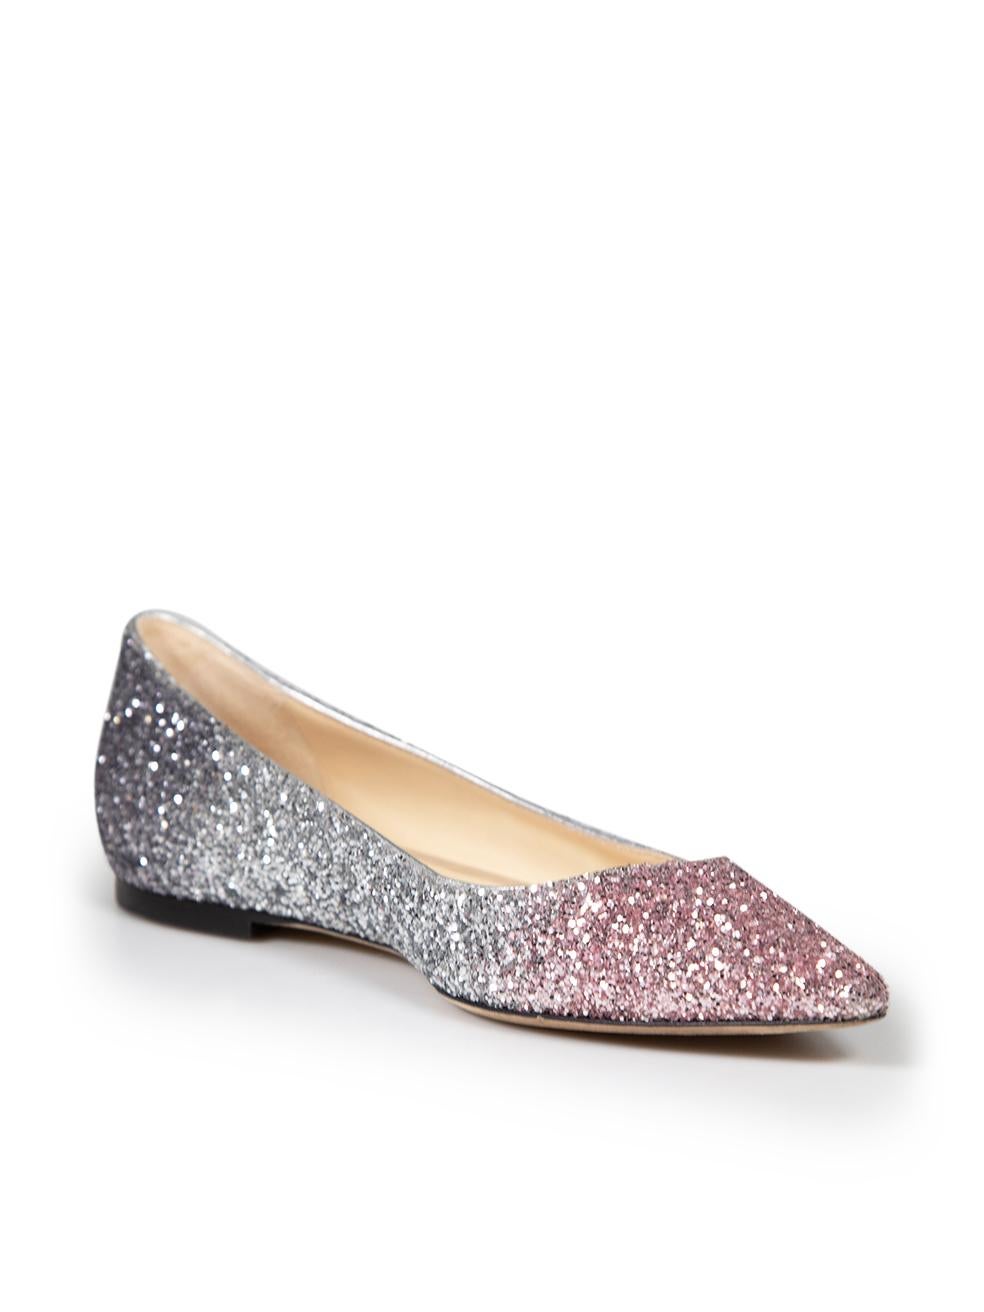 CONDITION is Very good. Minimal wear to flats is evident where the soles has been worn on this used Jimmy Choo designer resale item. This item comes with original dust bag and box.
 
 
 
 Details
 
 
 Model: Romy
 
 Multicolour - Silver and pink
 
